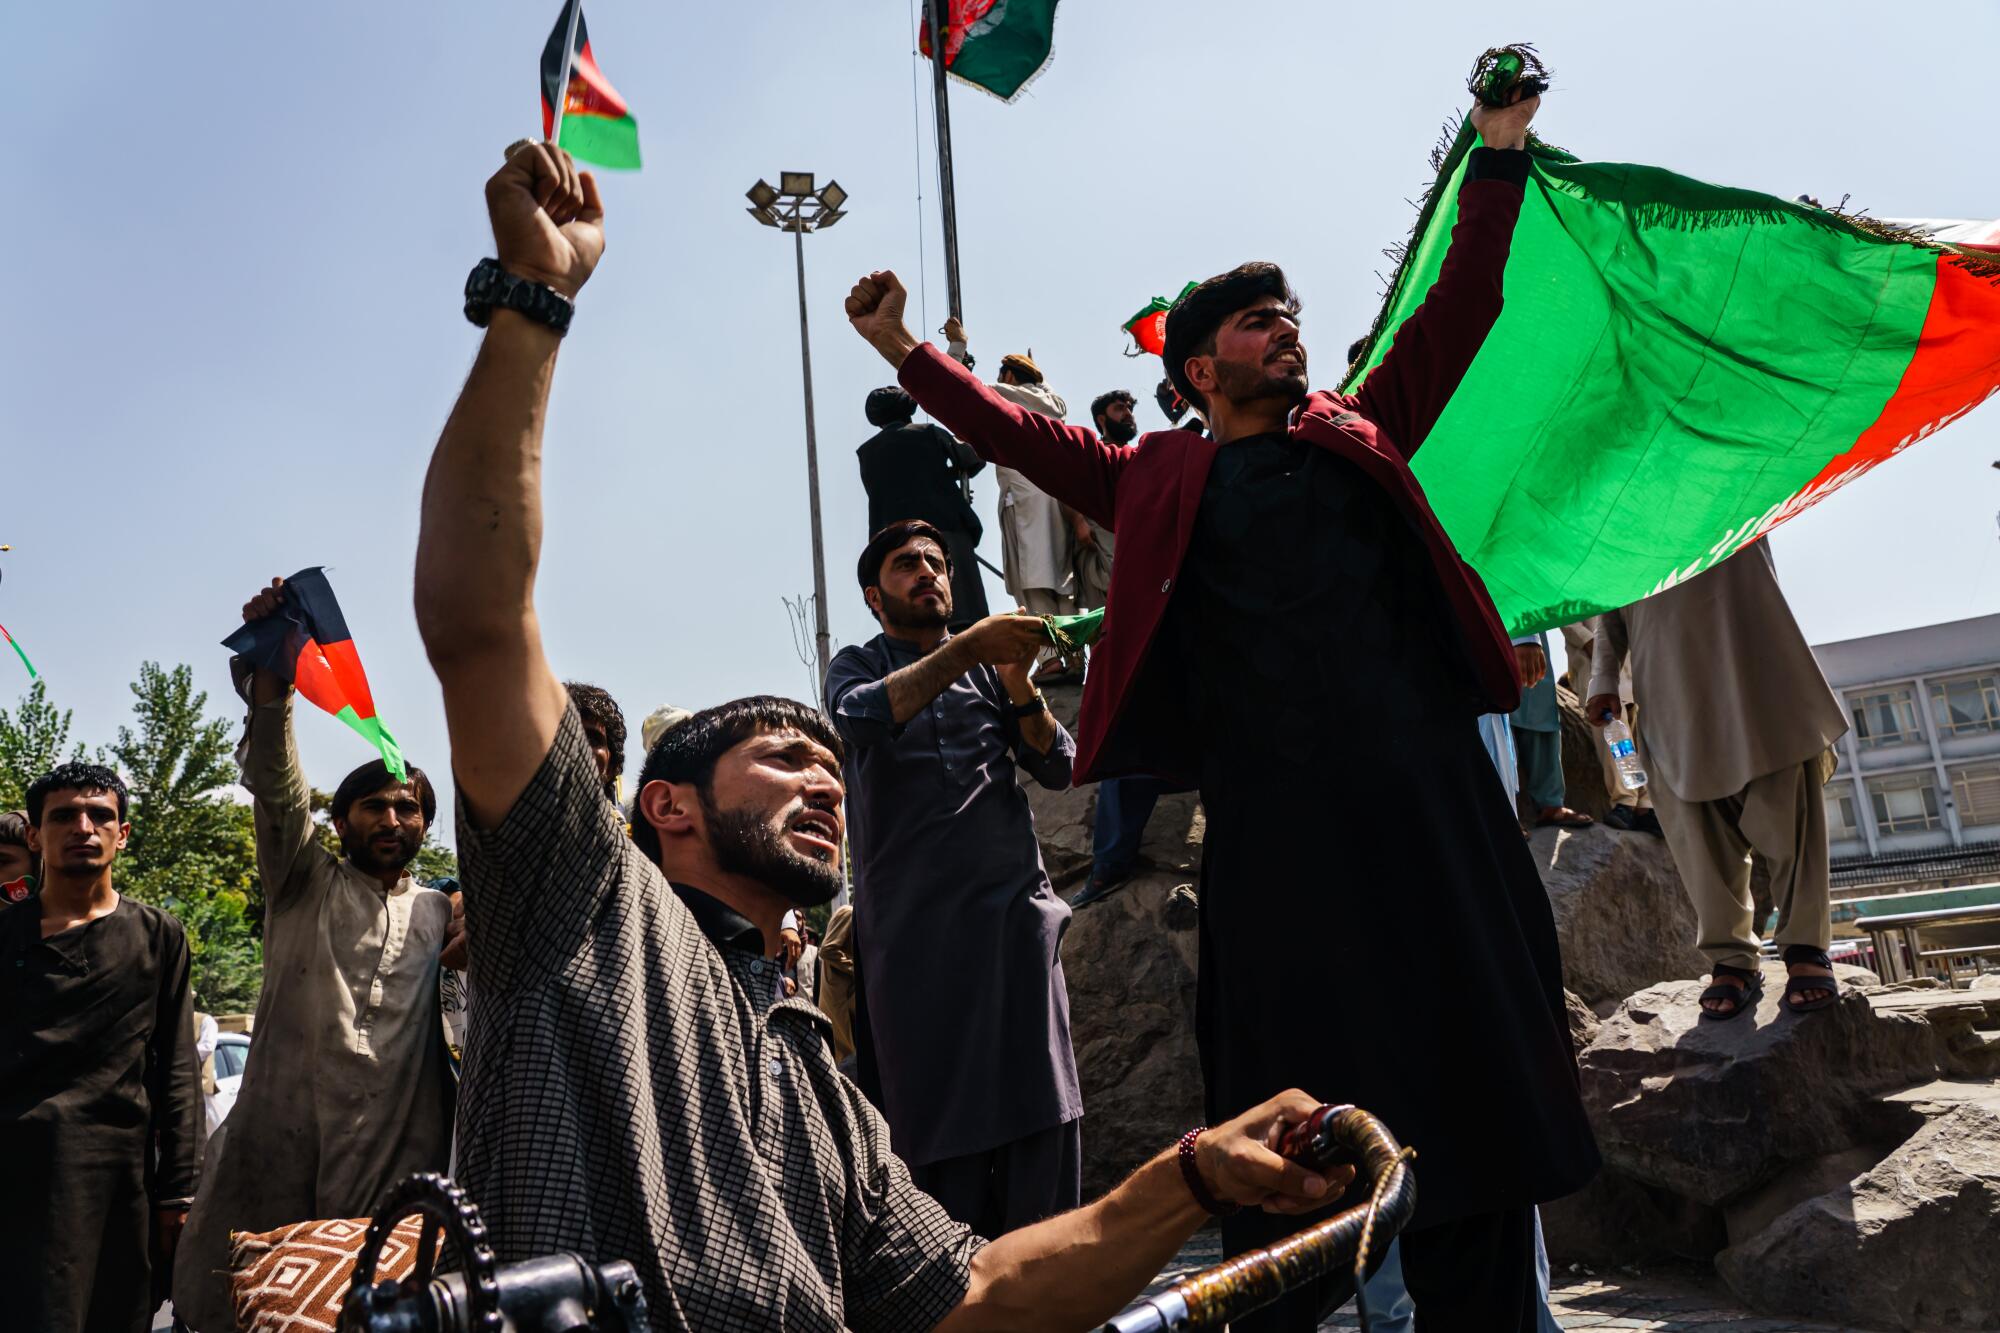 Afghans carry the national flag in Kabul, Afghanistan.